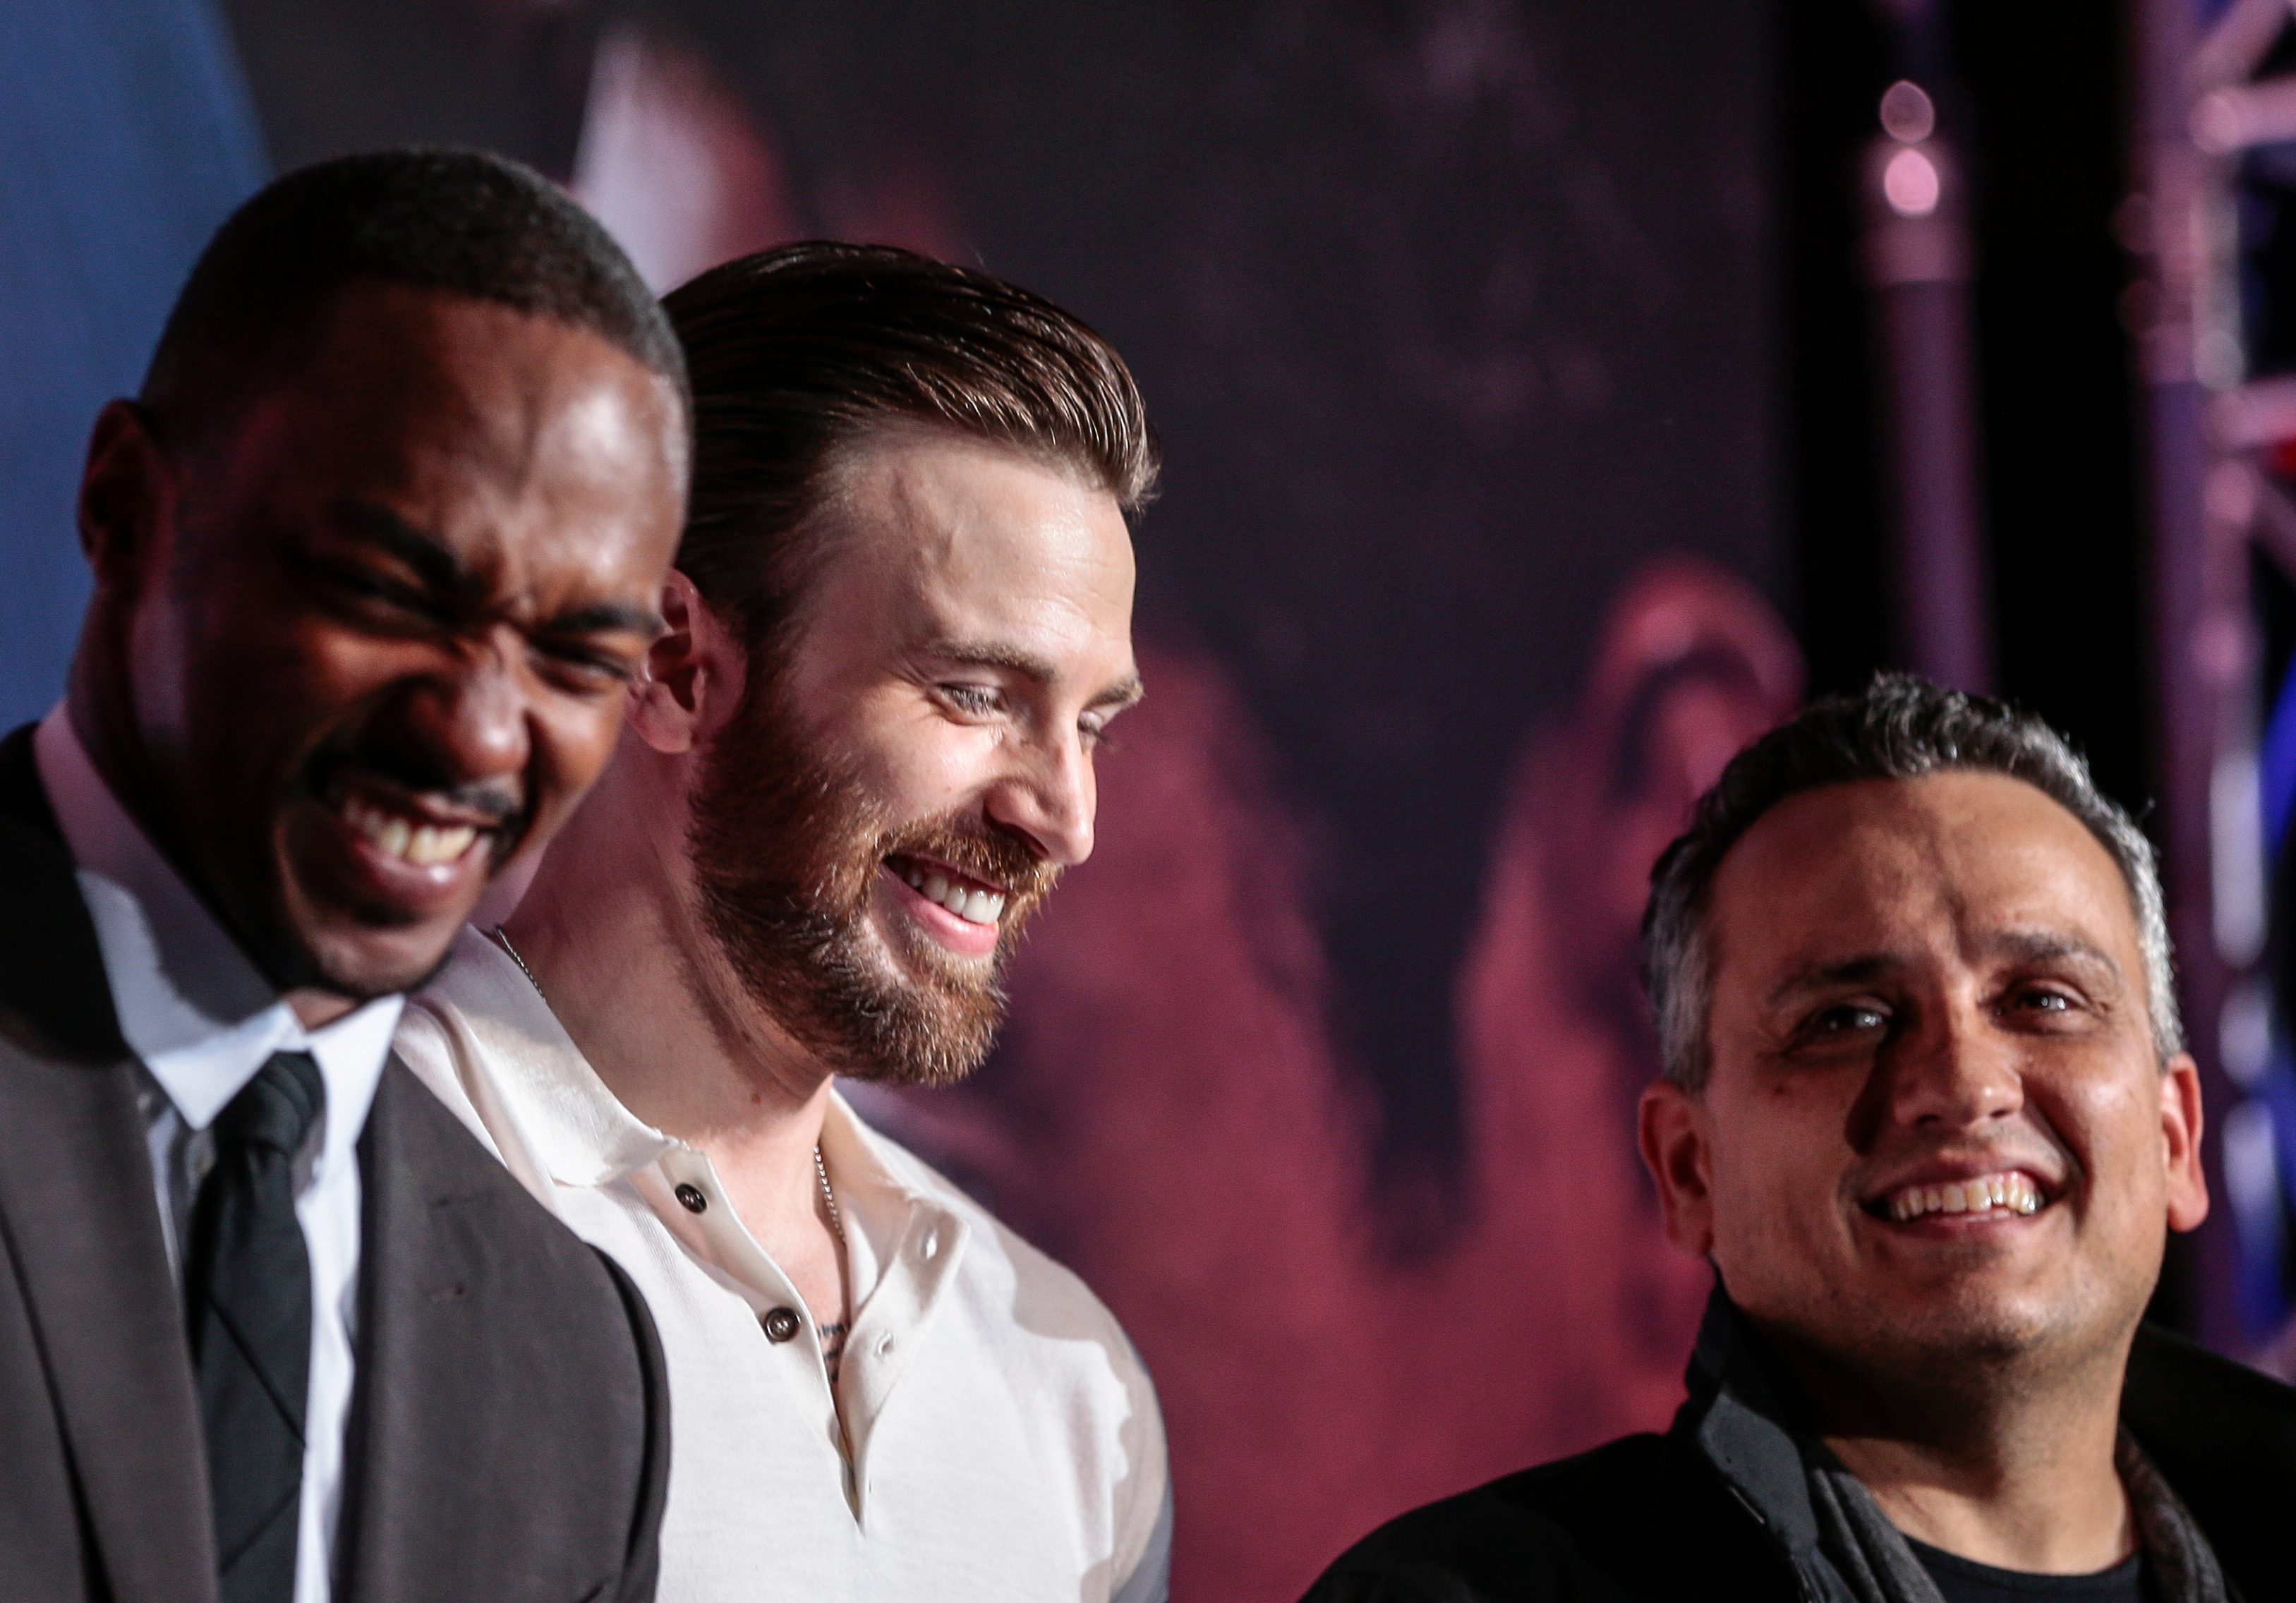 BLUE CARPET. Chris Evans, Anthony Mackie, and director Joe Russo at the premiere of 'Captain America: Civil War' in Singapore. Photo by Wallace Woon/EPA  